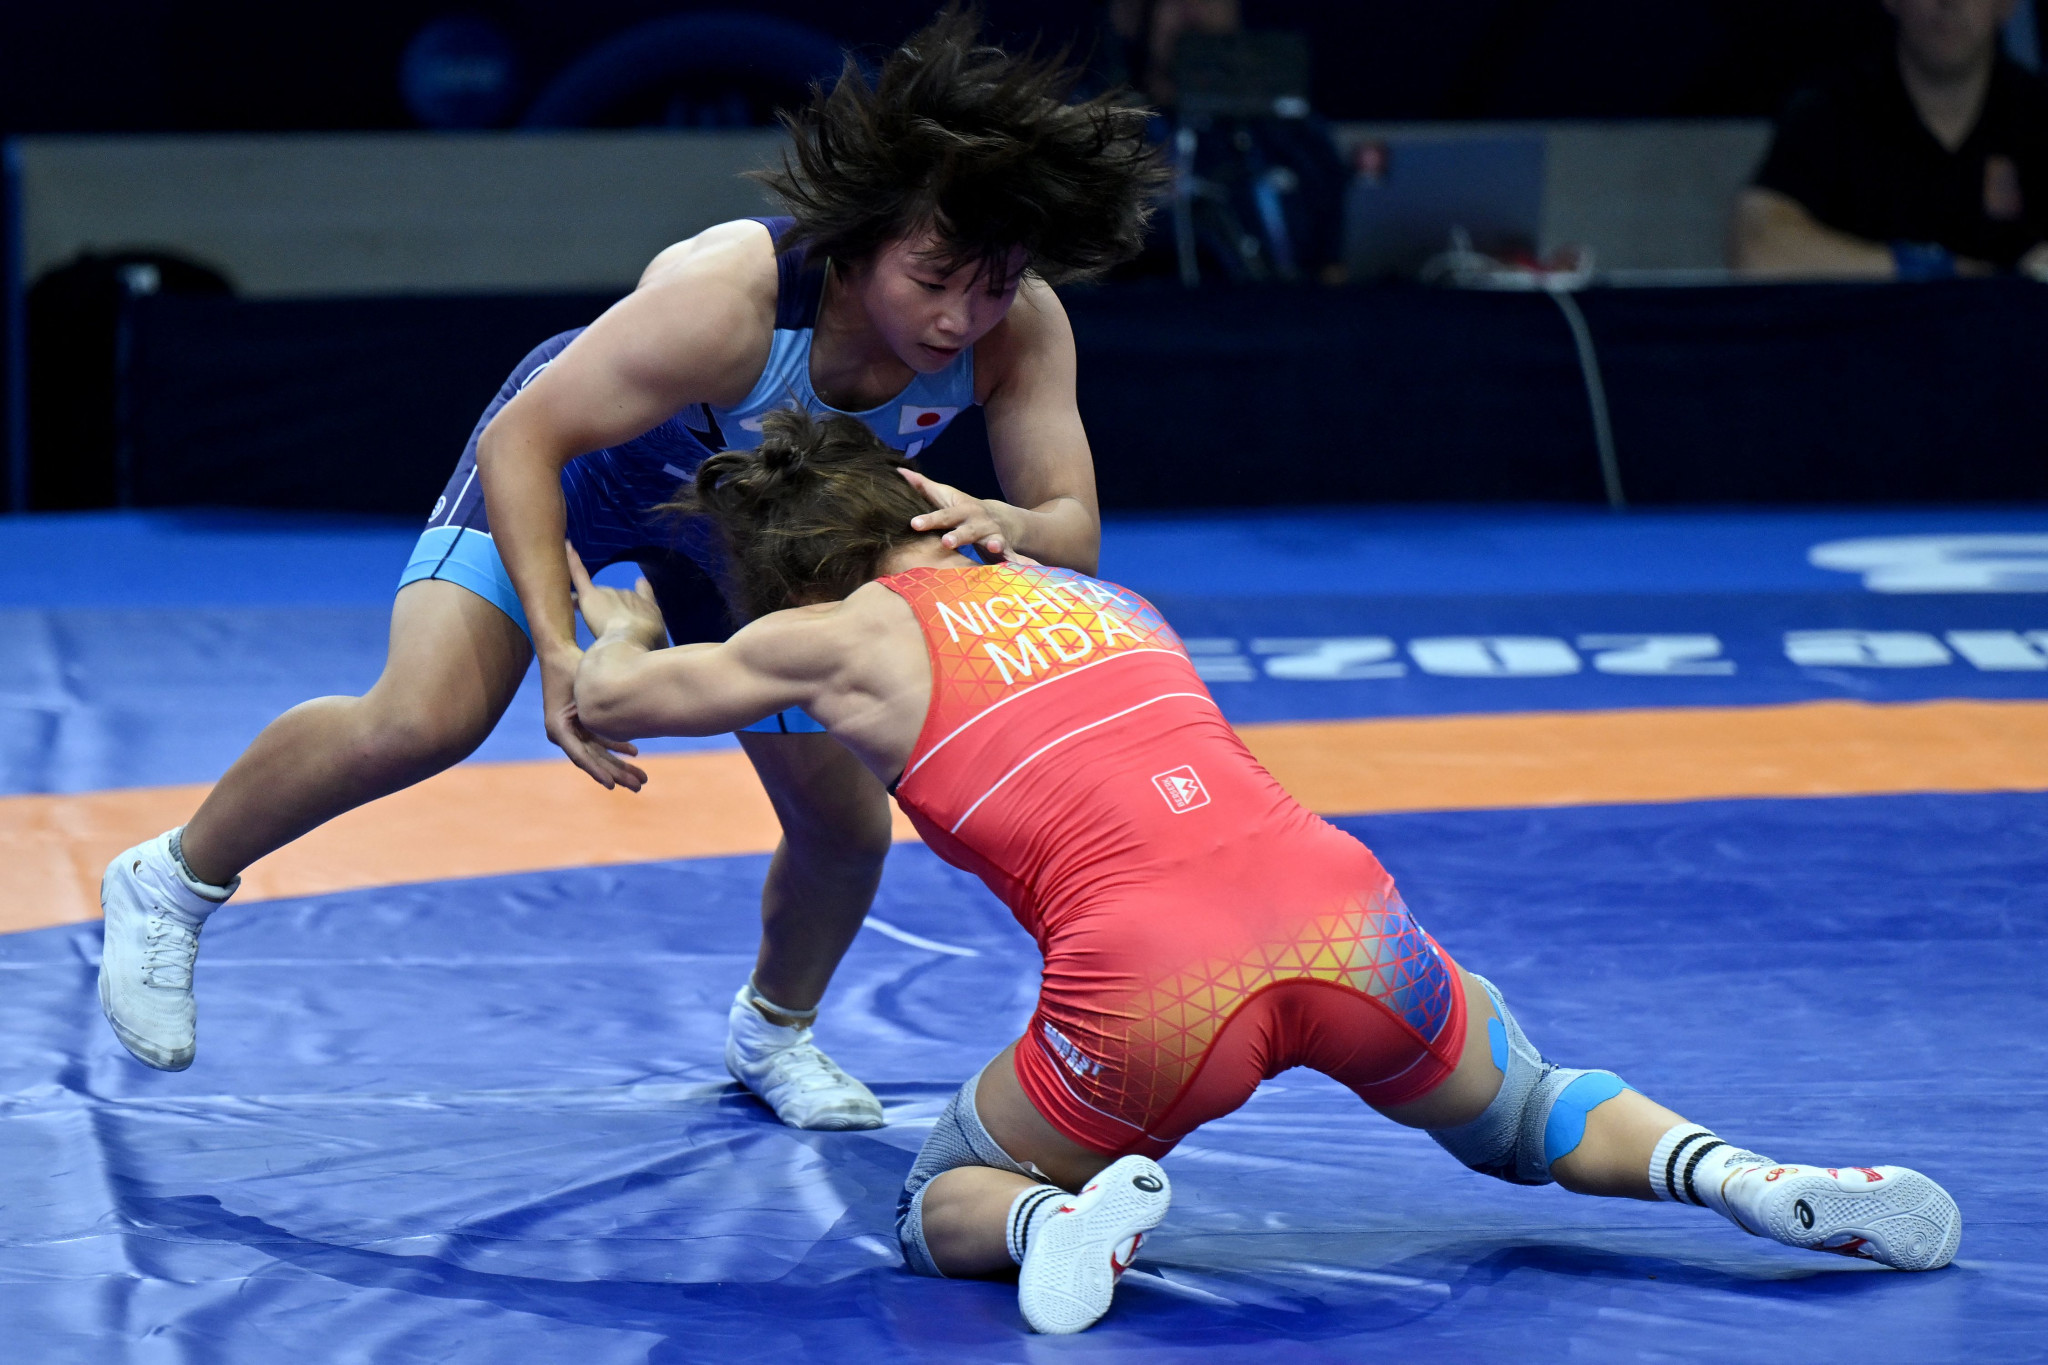 Tsugumi Sakurai of Japan, left, won gold for the third consecutive World Championships by edging the women's 57kg final against Anastasia Nichita of Moldova, right ©Getty Images